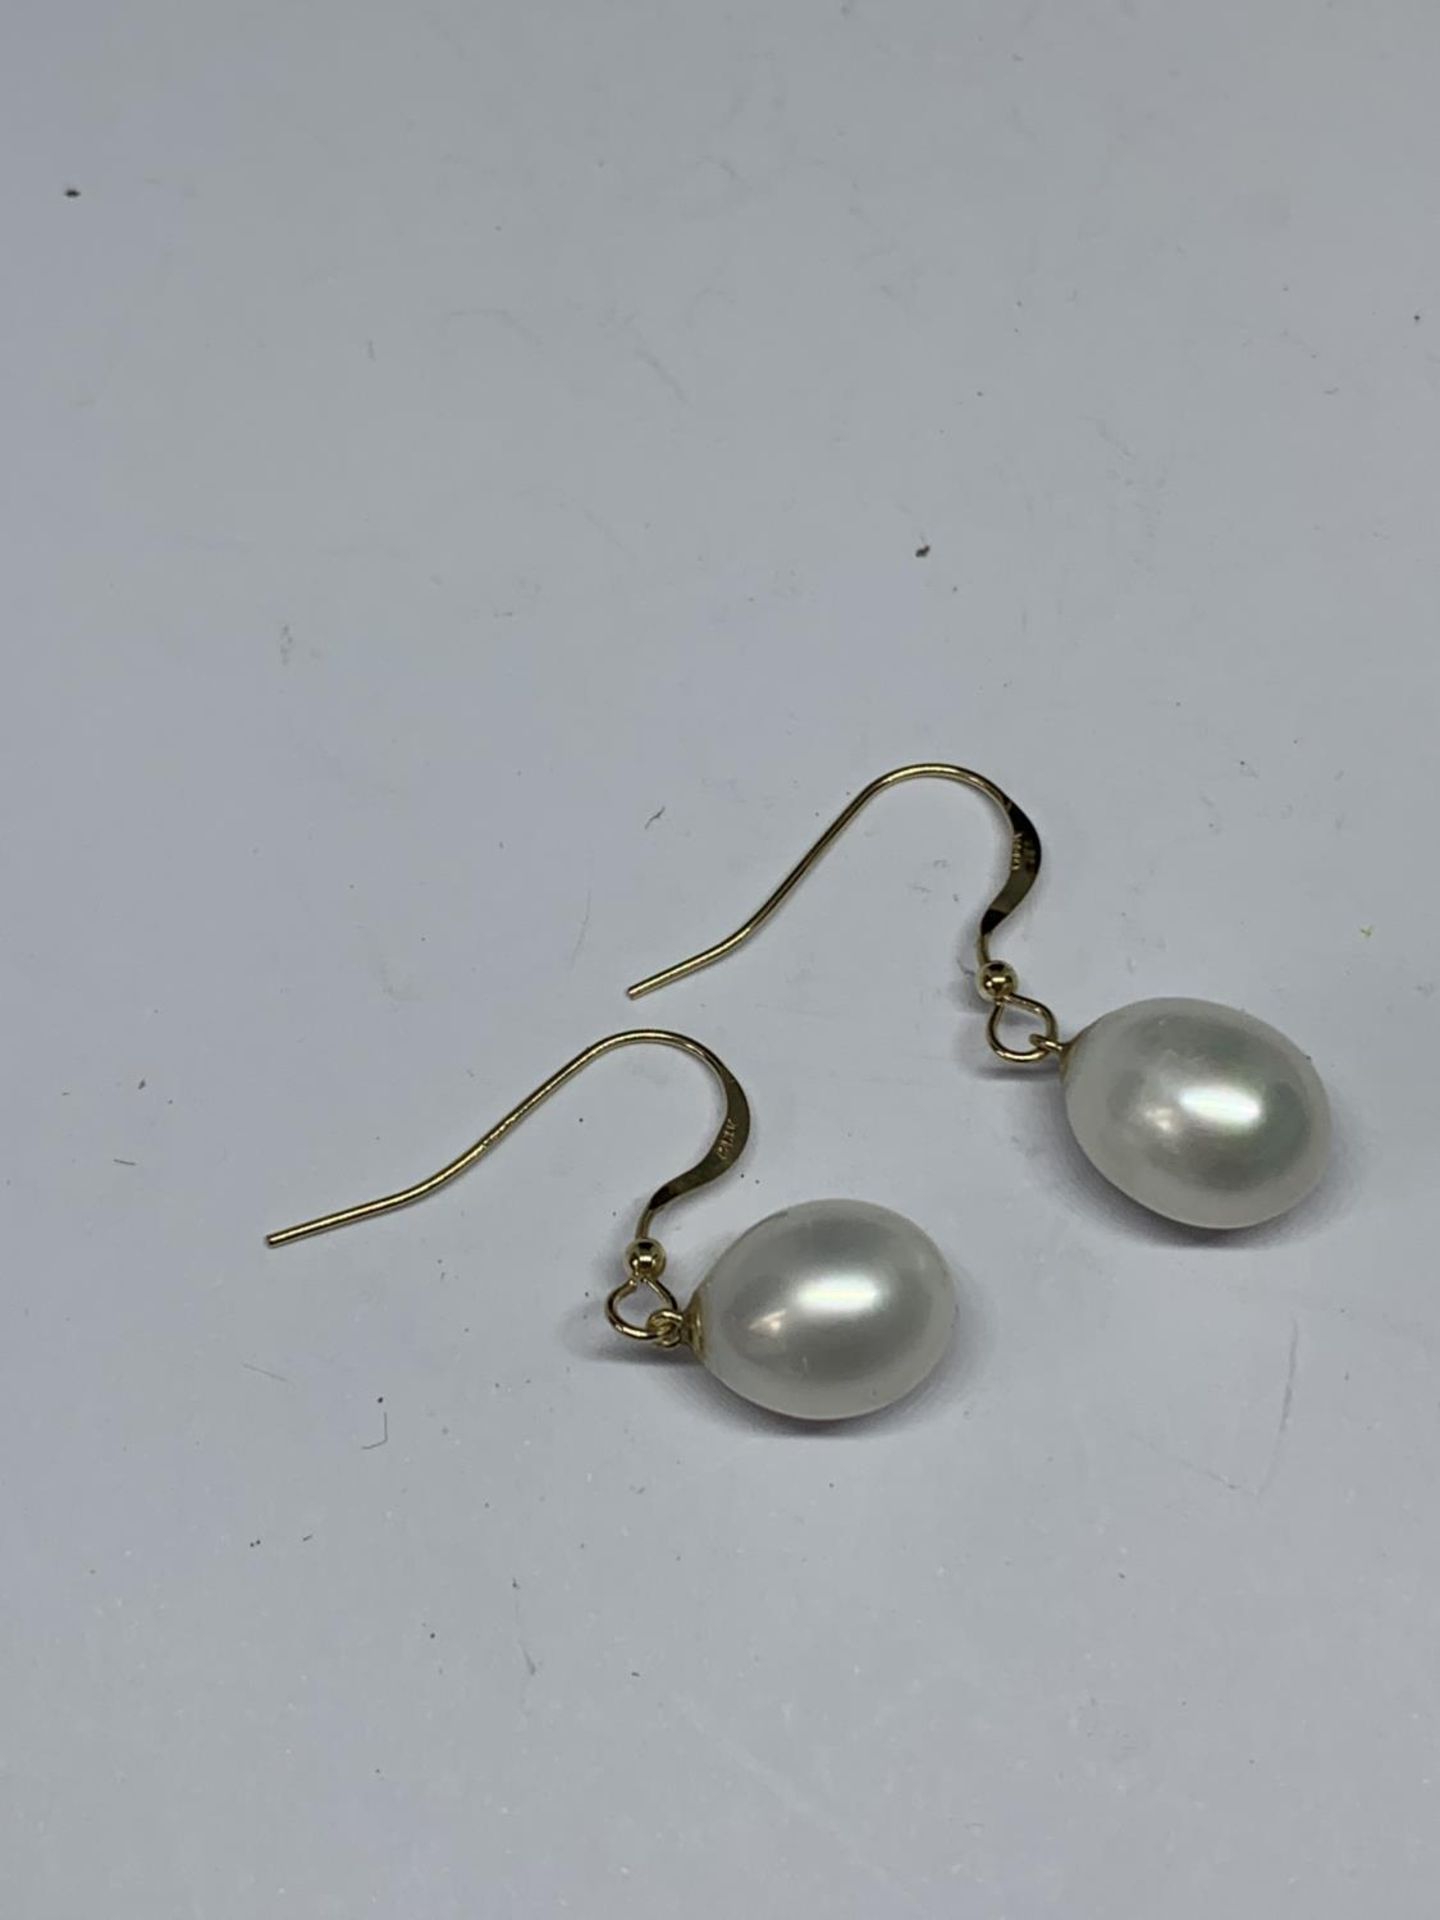 A PAIR OF 14 CARAT GOLD AND PEARL EARRINGS GROSS WEIGHT 3.62 GRAMS